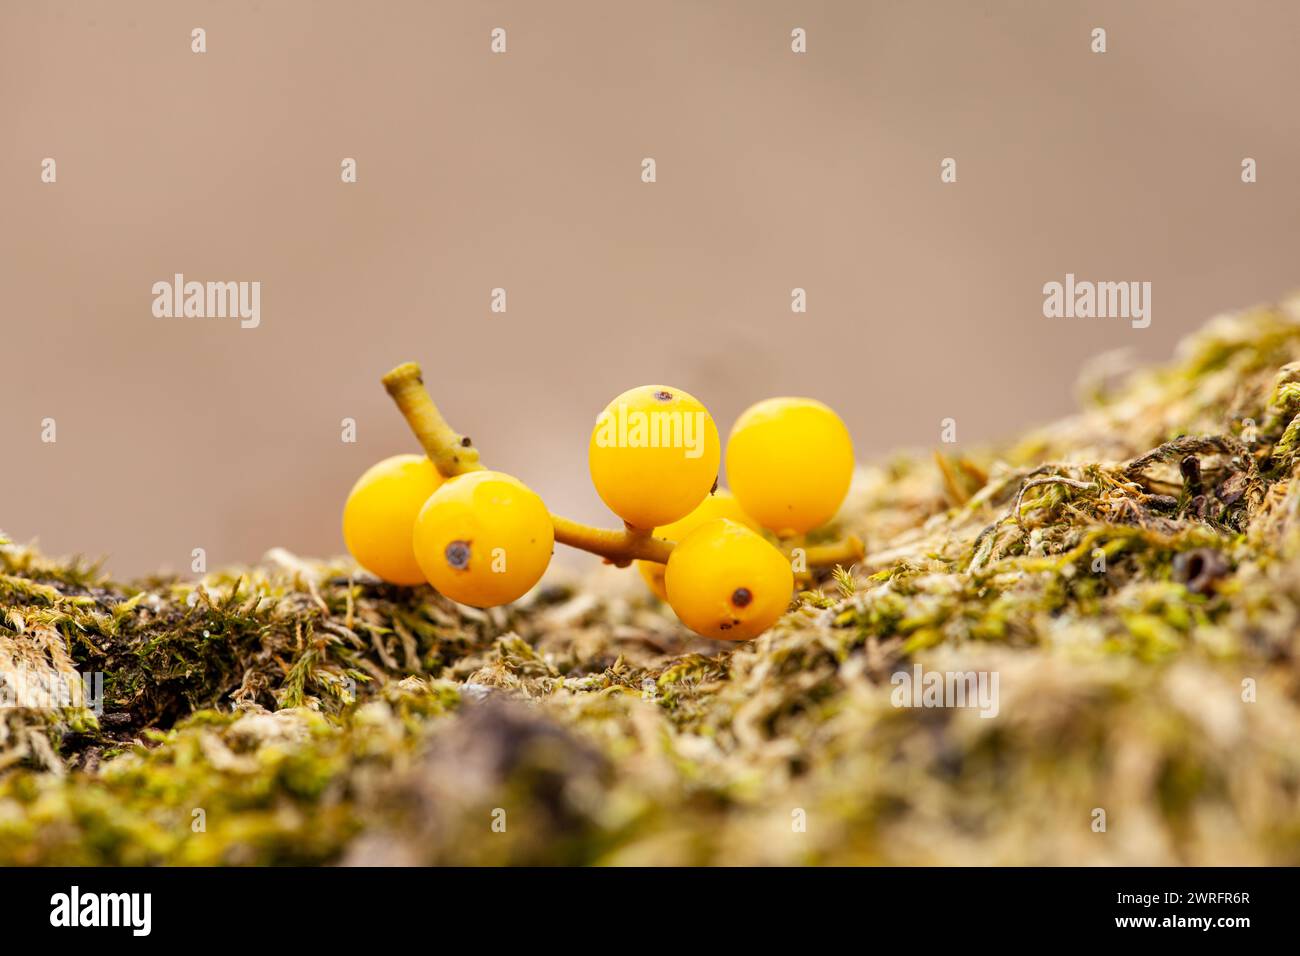 A cluster of yellow berries rests on a bed of moss in a natural landscape. Nearby, arthropods and insects scurry among the plants and twigs Stock Photo